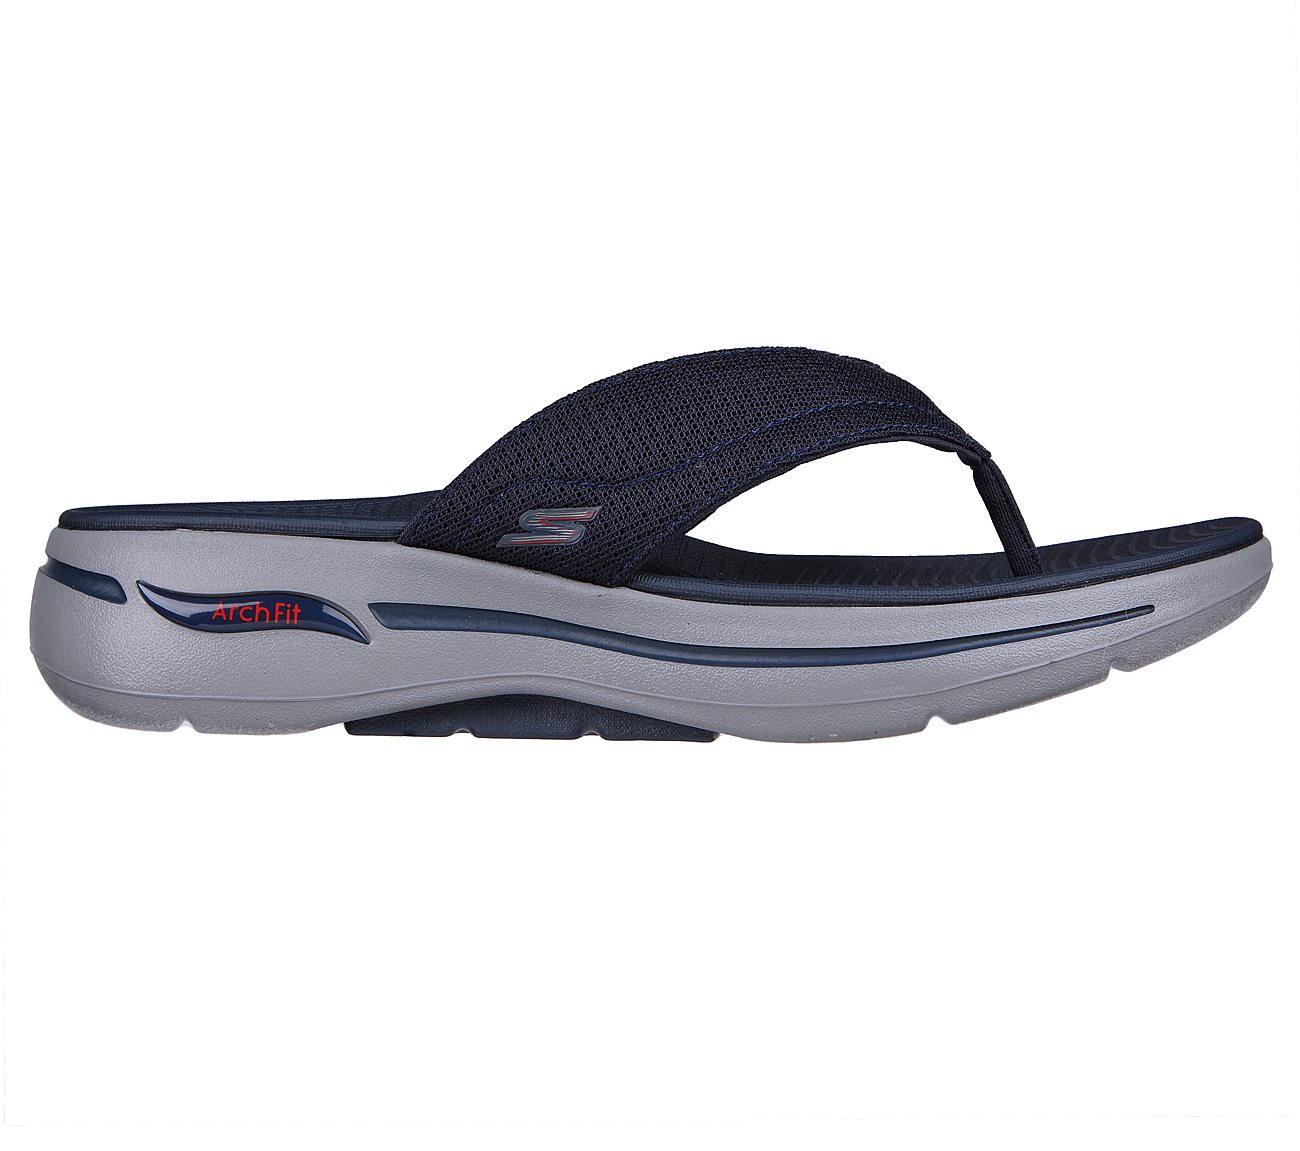 Buy SKECHERS Shoes for Women Online at Regal Shoes